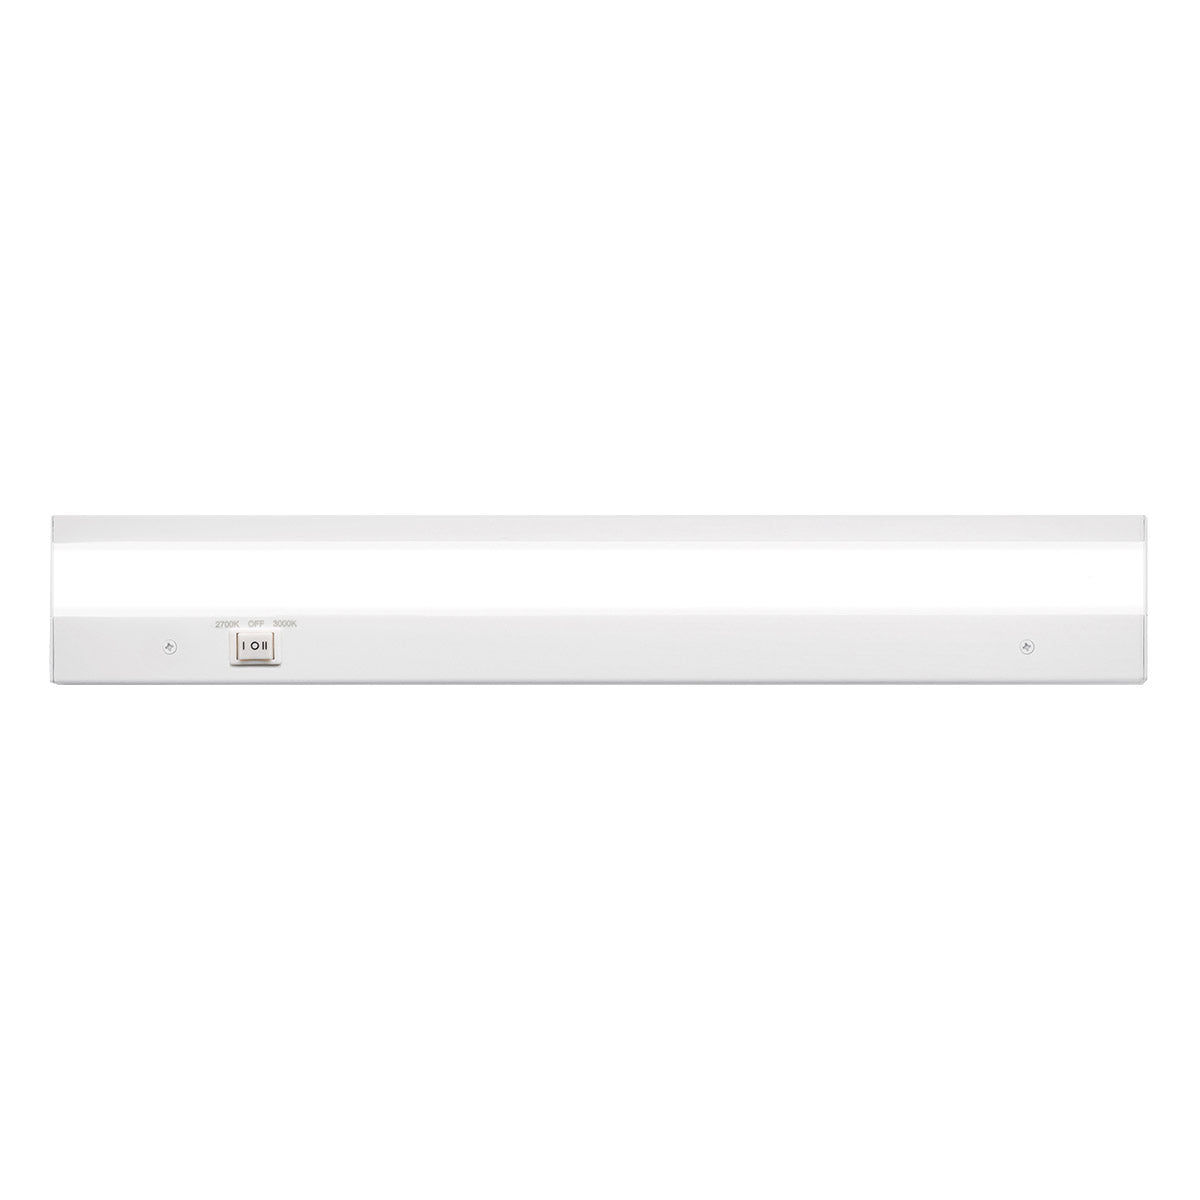 WAC Lighting BA-ACLED18-27 30WT Duo ACLED Dual Color Option Bar in White Finish; 2700K and 3000K, 18 Inches - 2